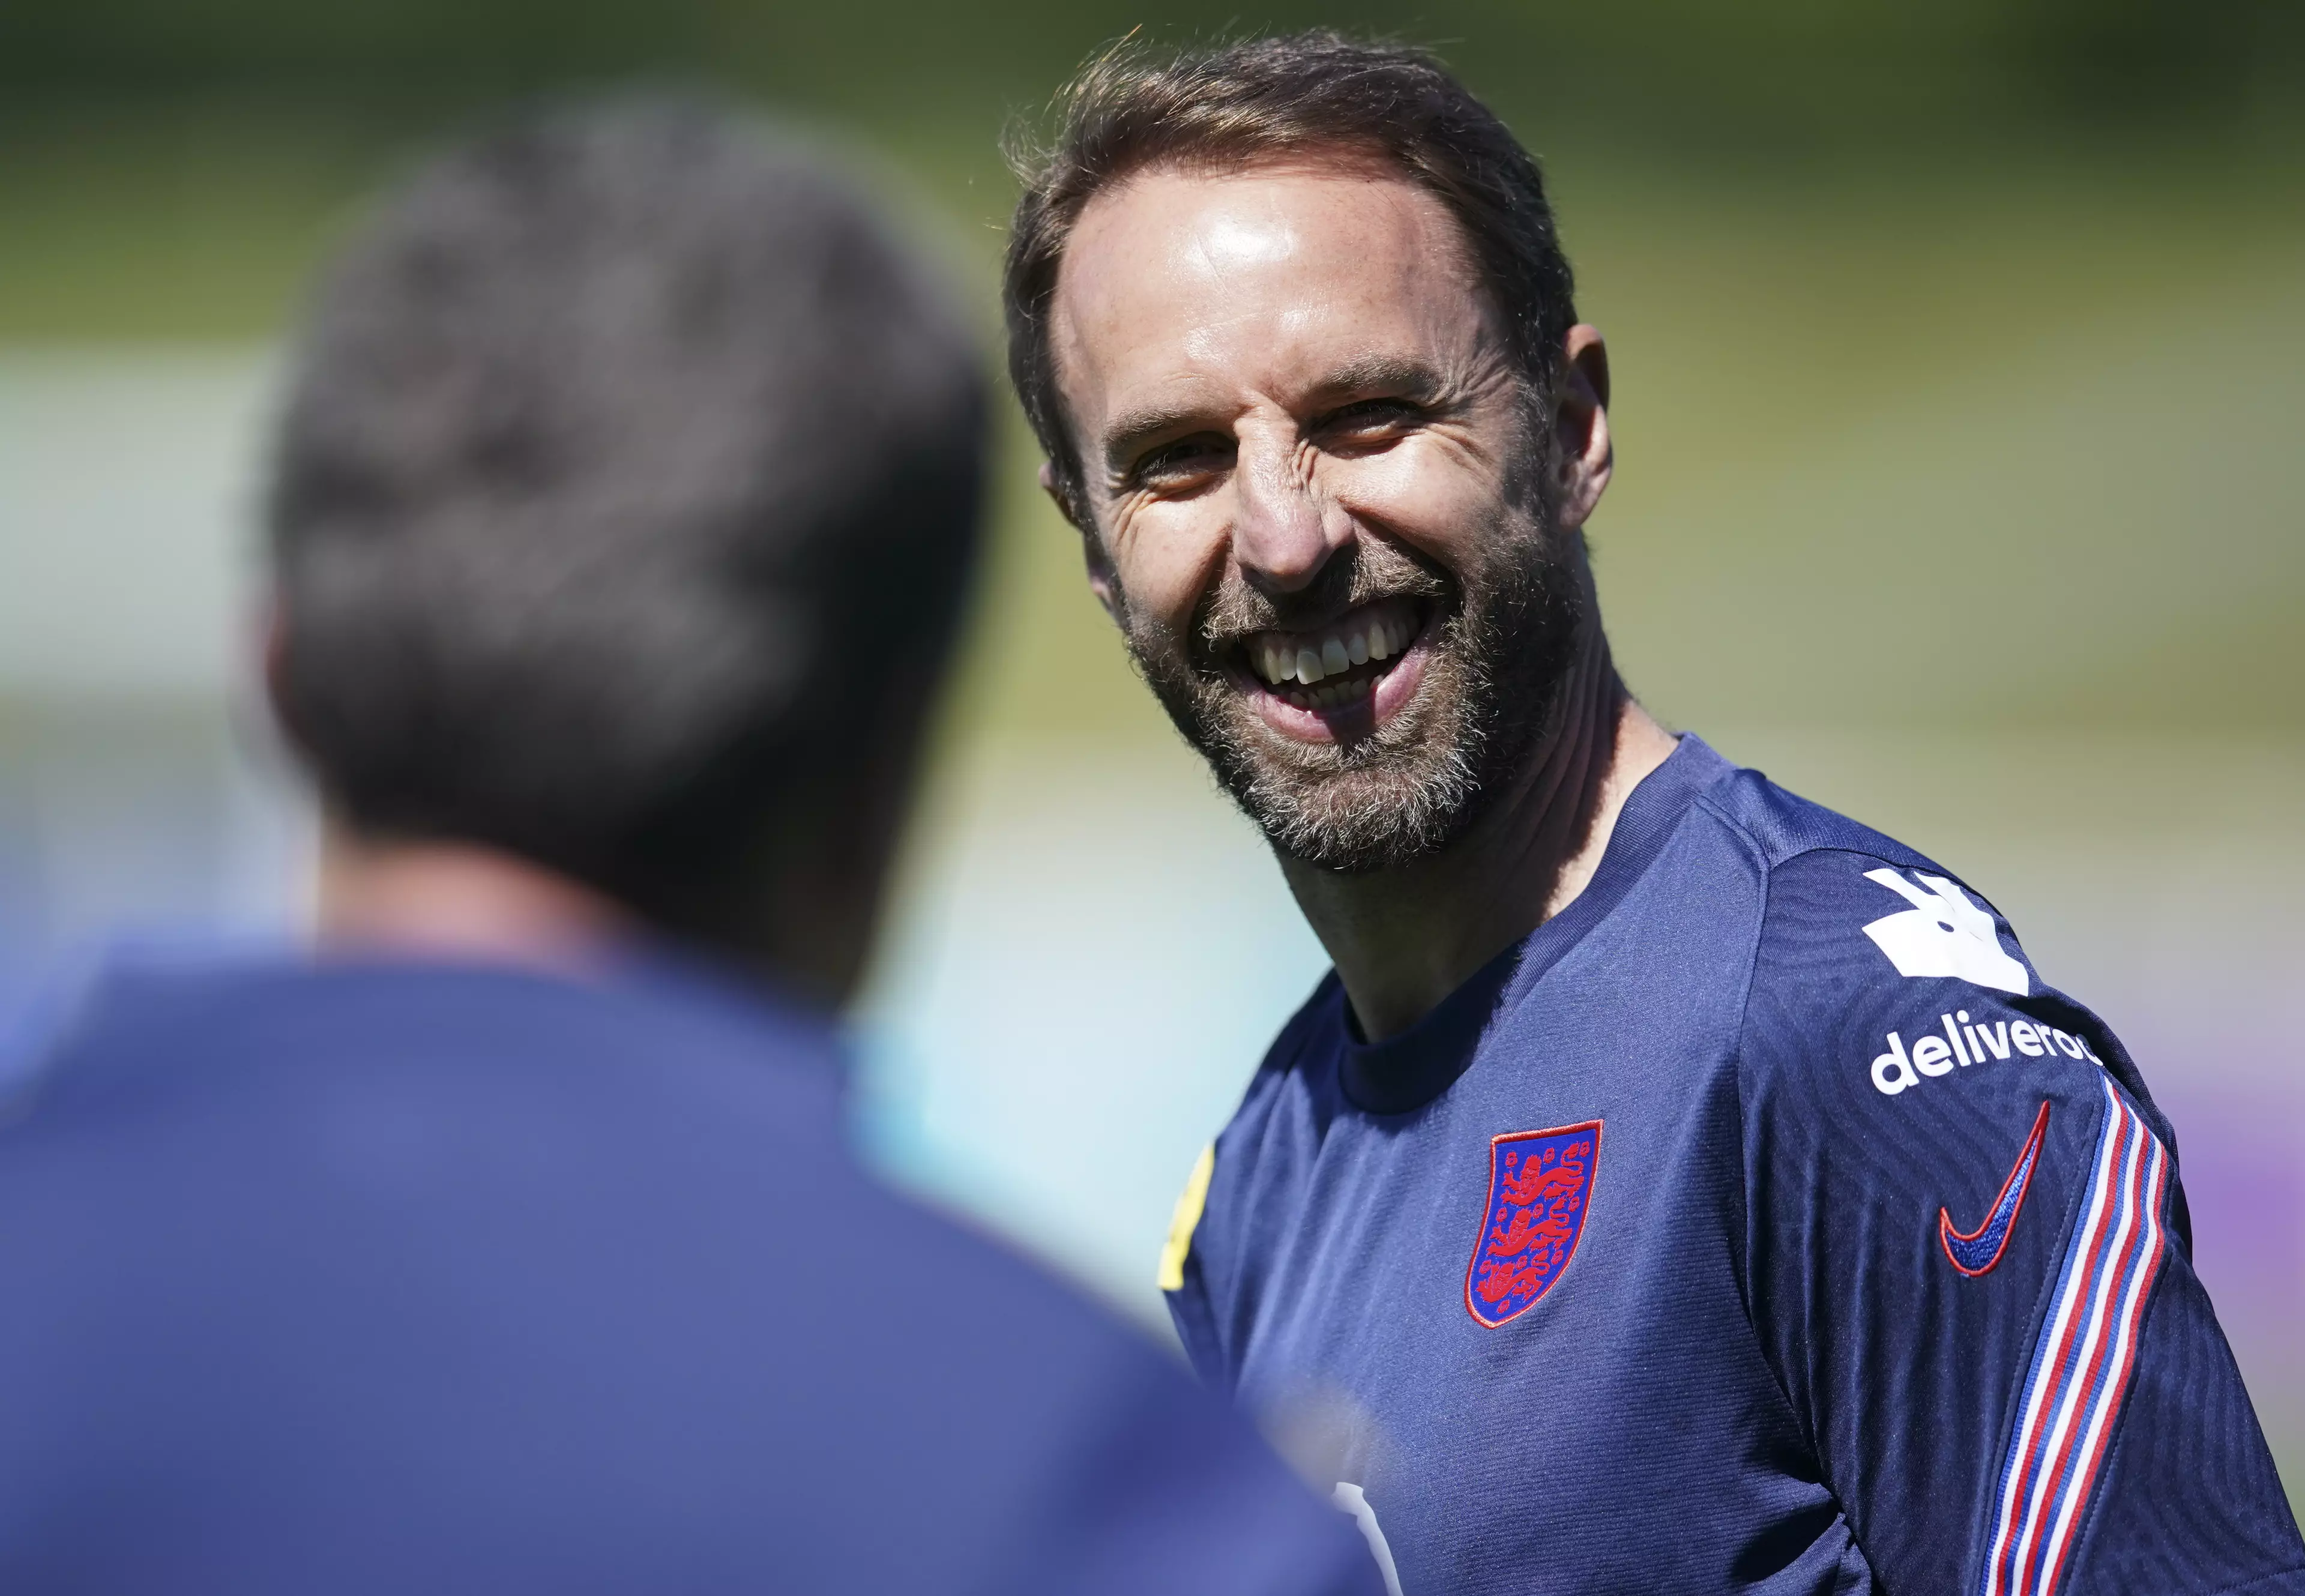 Gareth Southgate's England are the current second-favourites to win Euro 2020